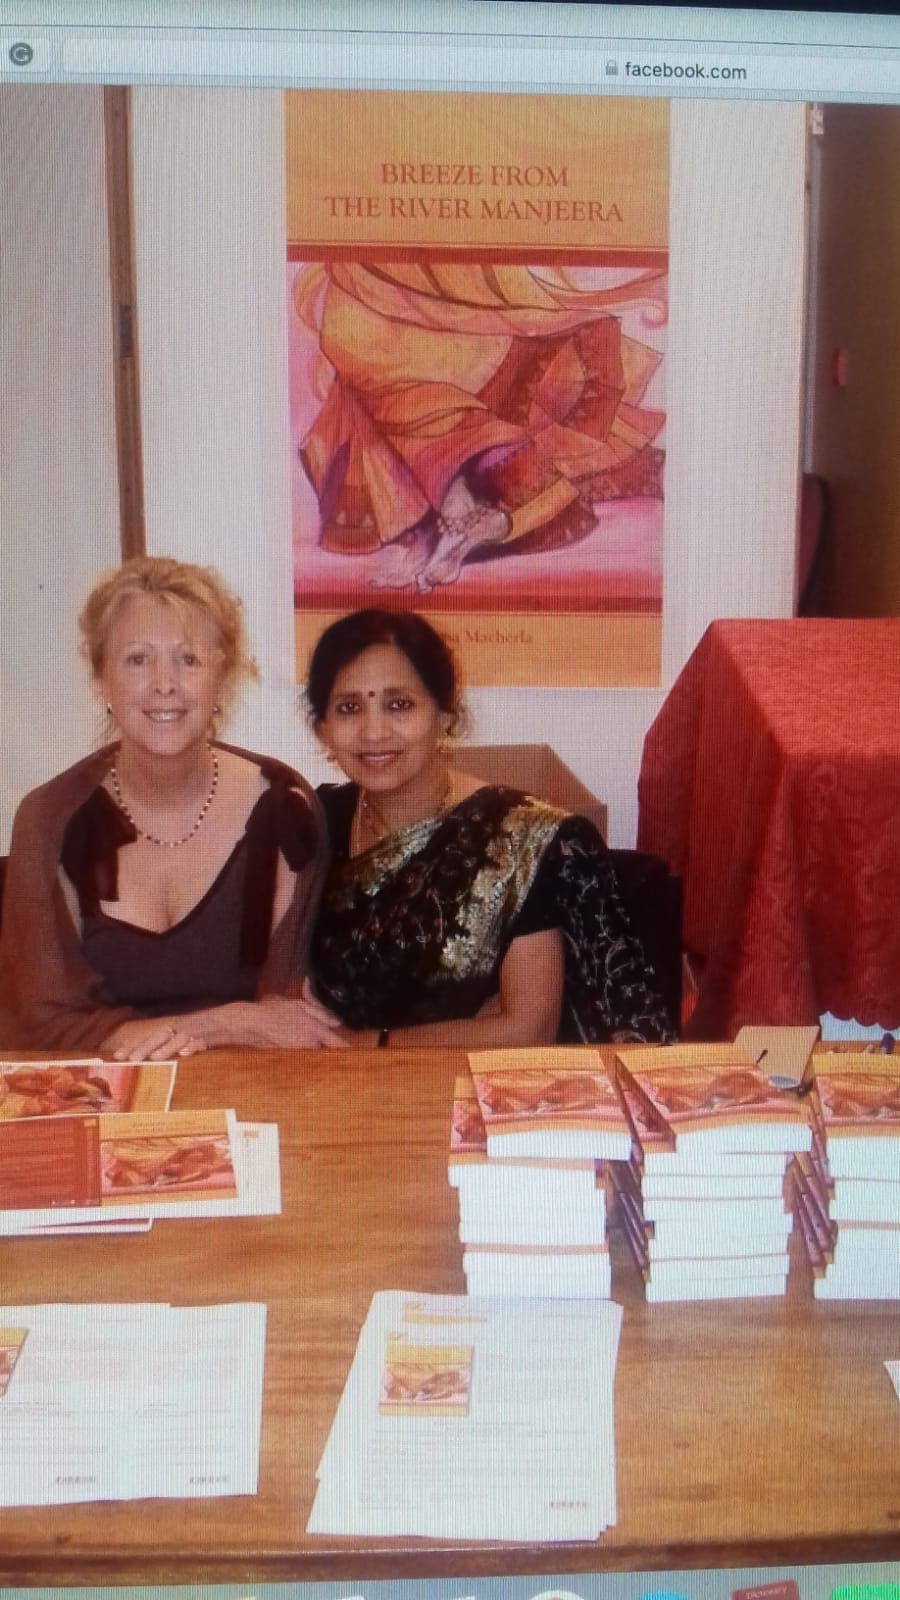 With my publisher, Lynn Michell, at the book launch of my first book, Breeze From The River Manjeera.